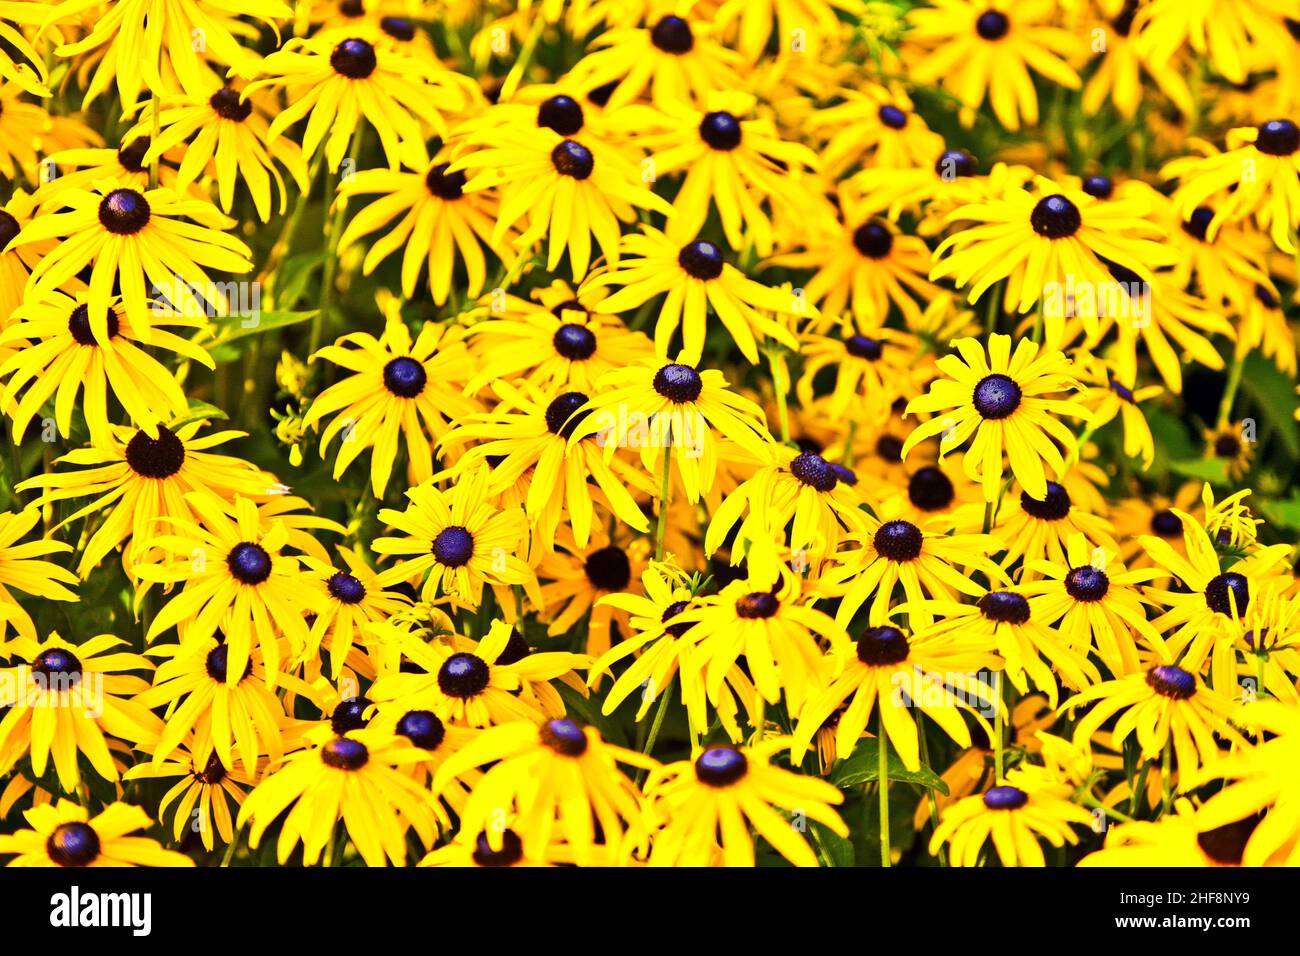 yellow cut leaved coneflower prospers in the bed Stock Photo